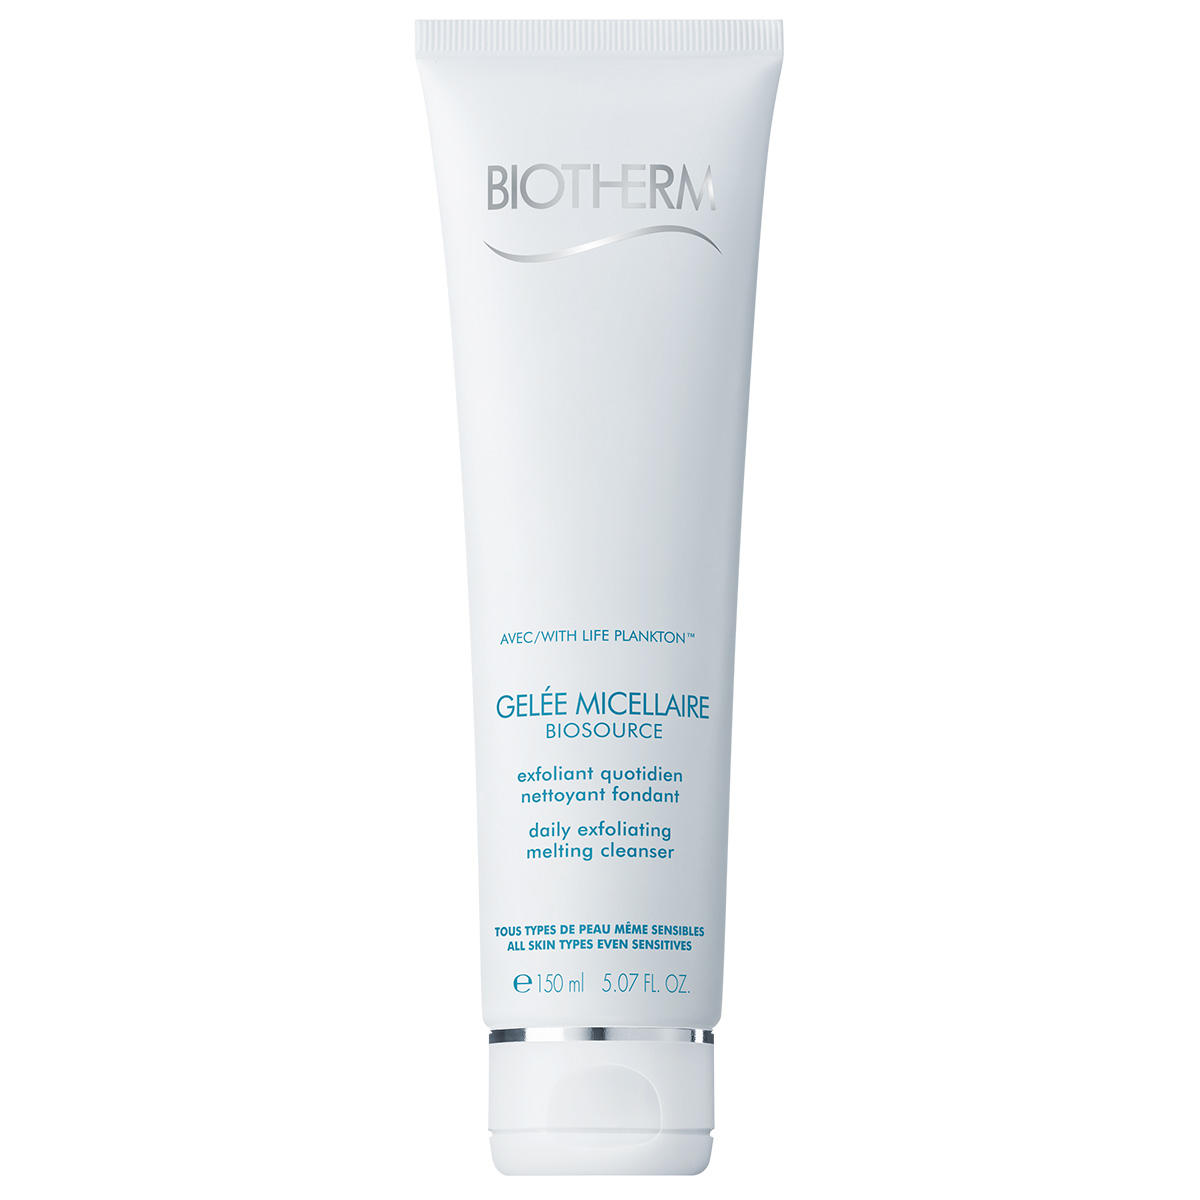 Biotherm Biosource Gelée Micellaire Daily Exfoliating Melting Cleanser Scrub Facial 150 ml - 1